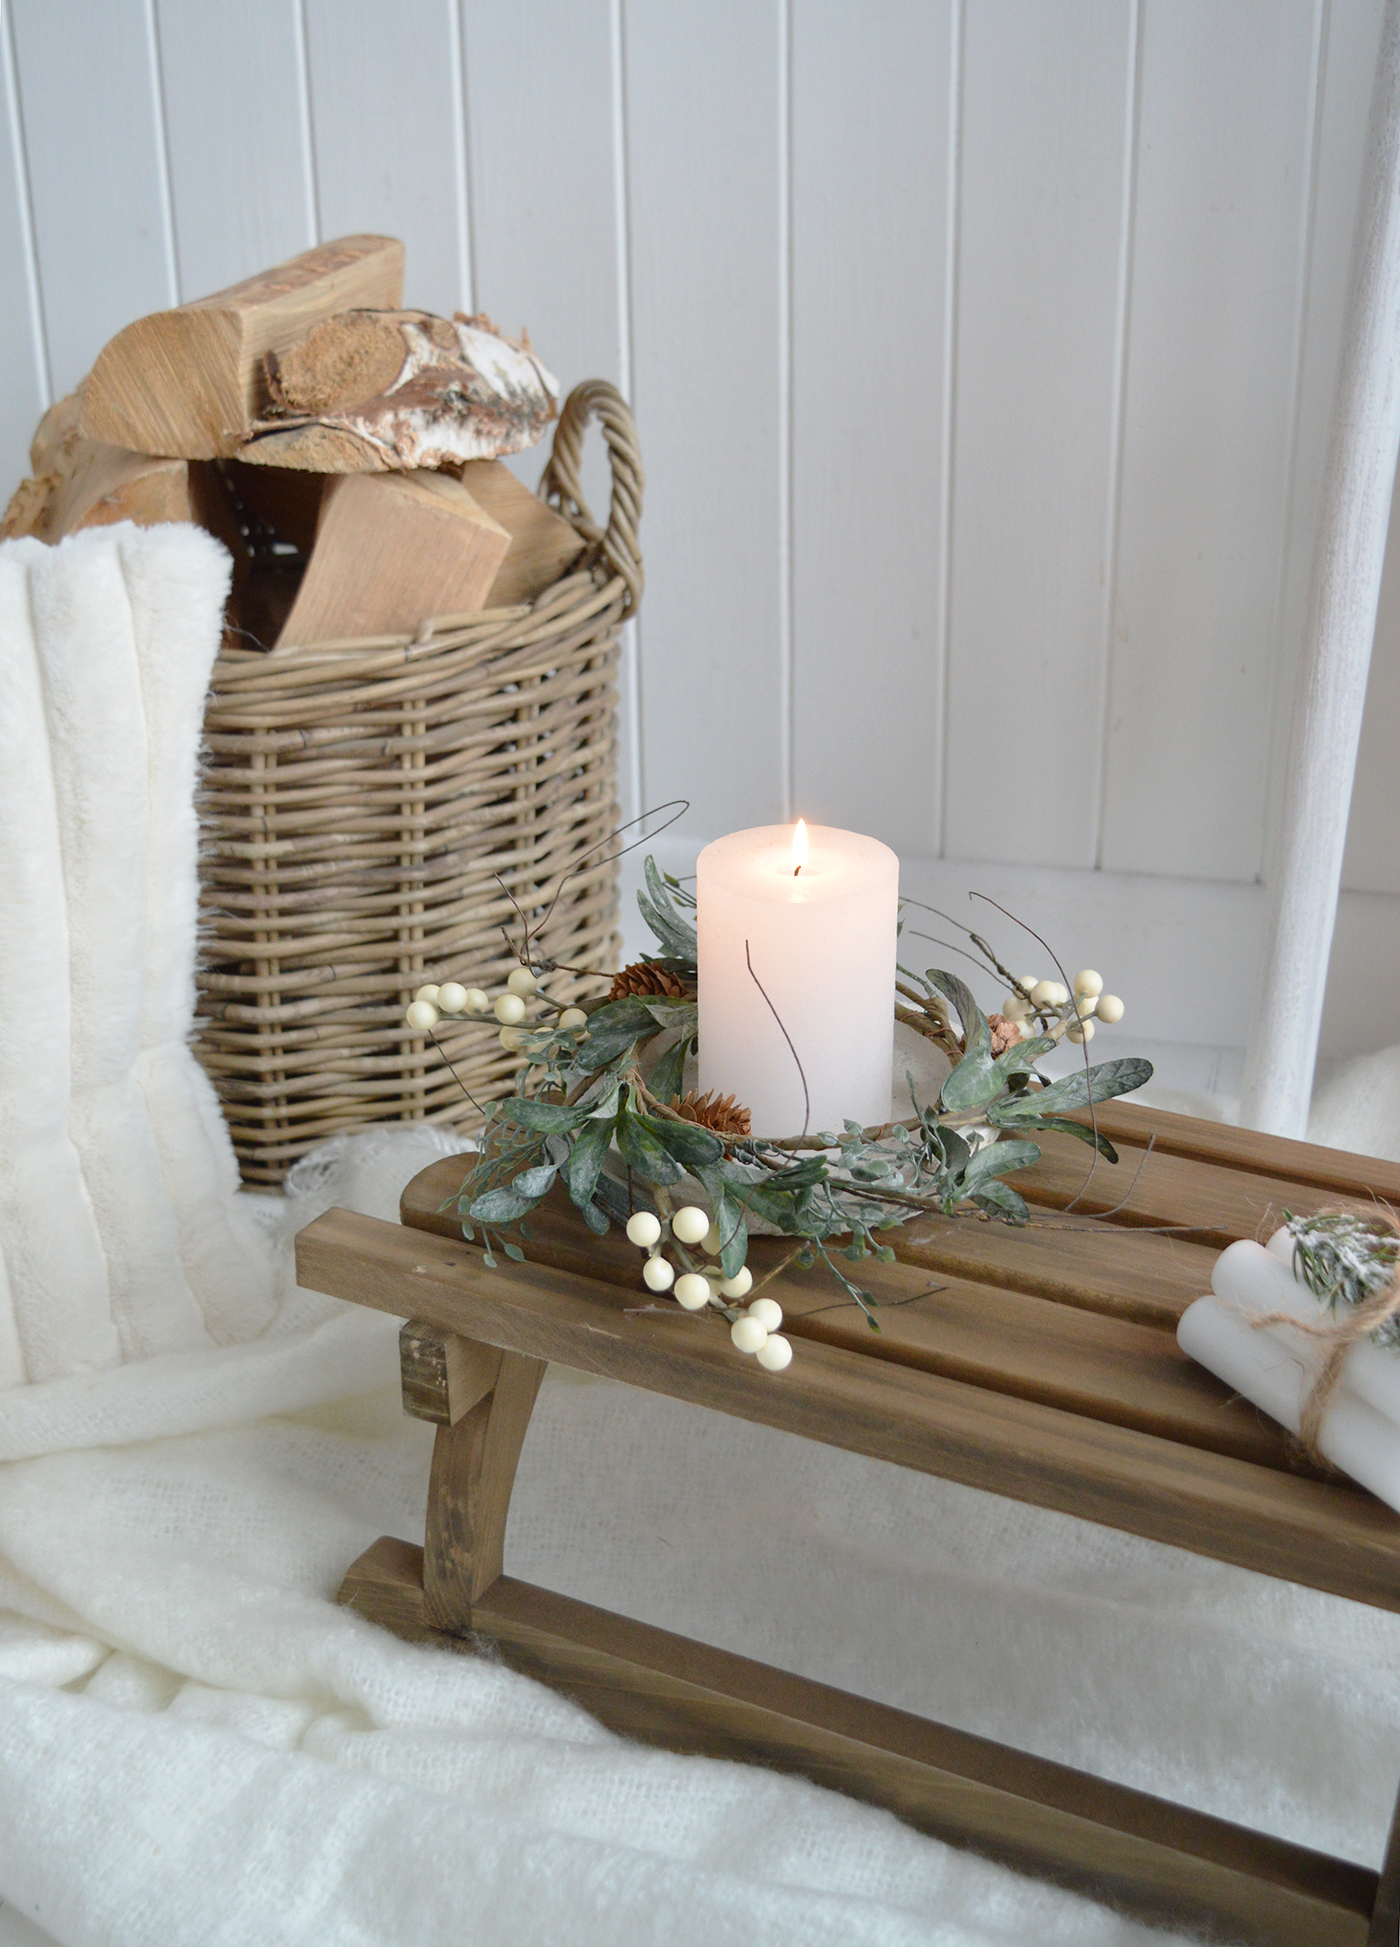 White berry candle ring on our wooden sleigh for luxury Christmas decor